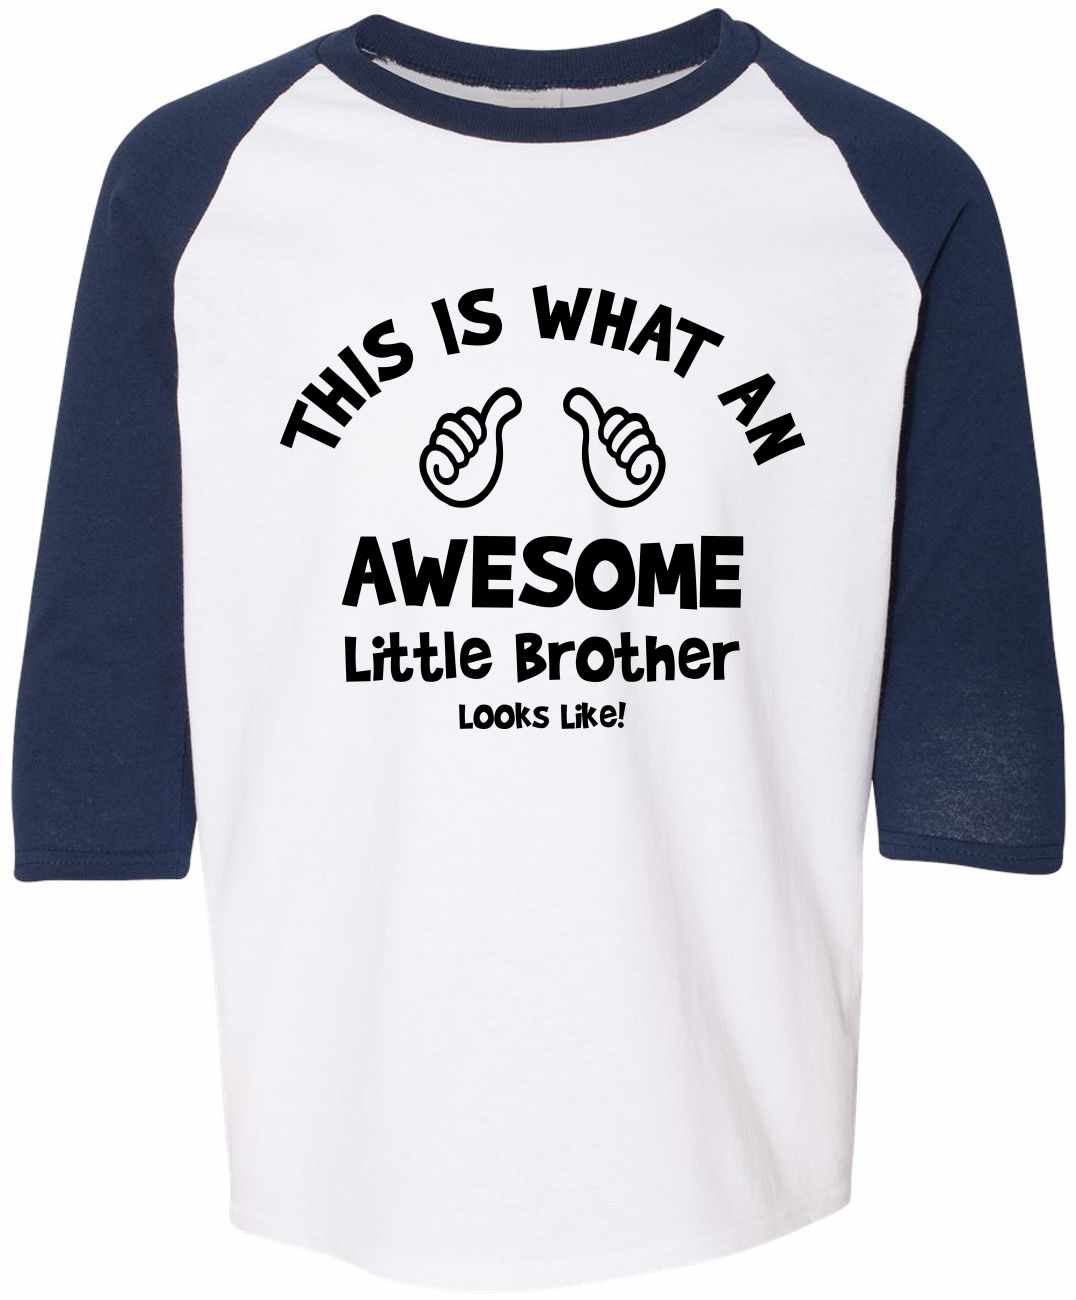 This is What an AWESOME LITTLE BROTHER Looks Like on Youth Baseball Shirt (#1036-212)